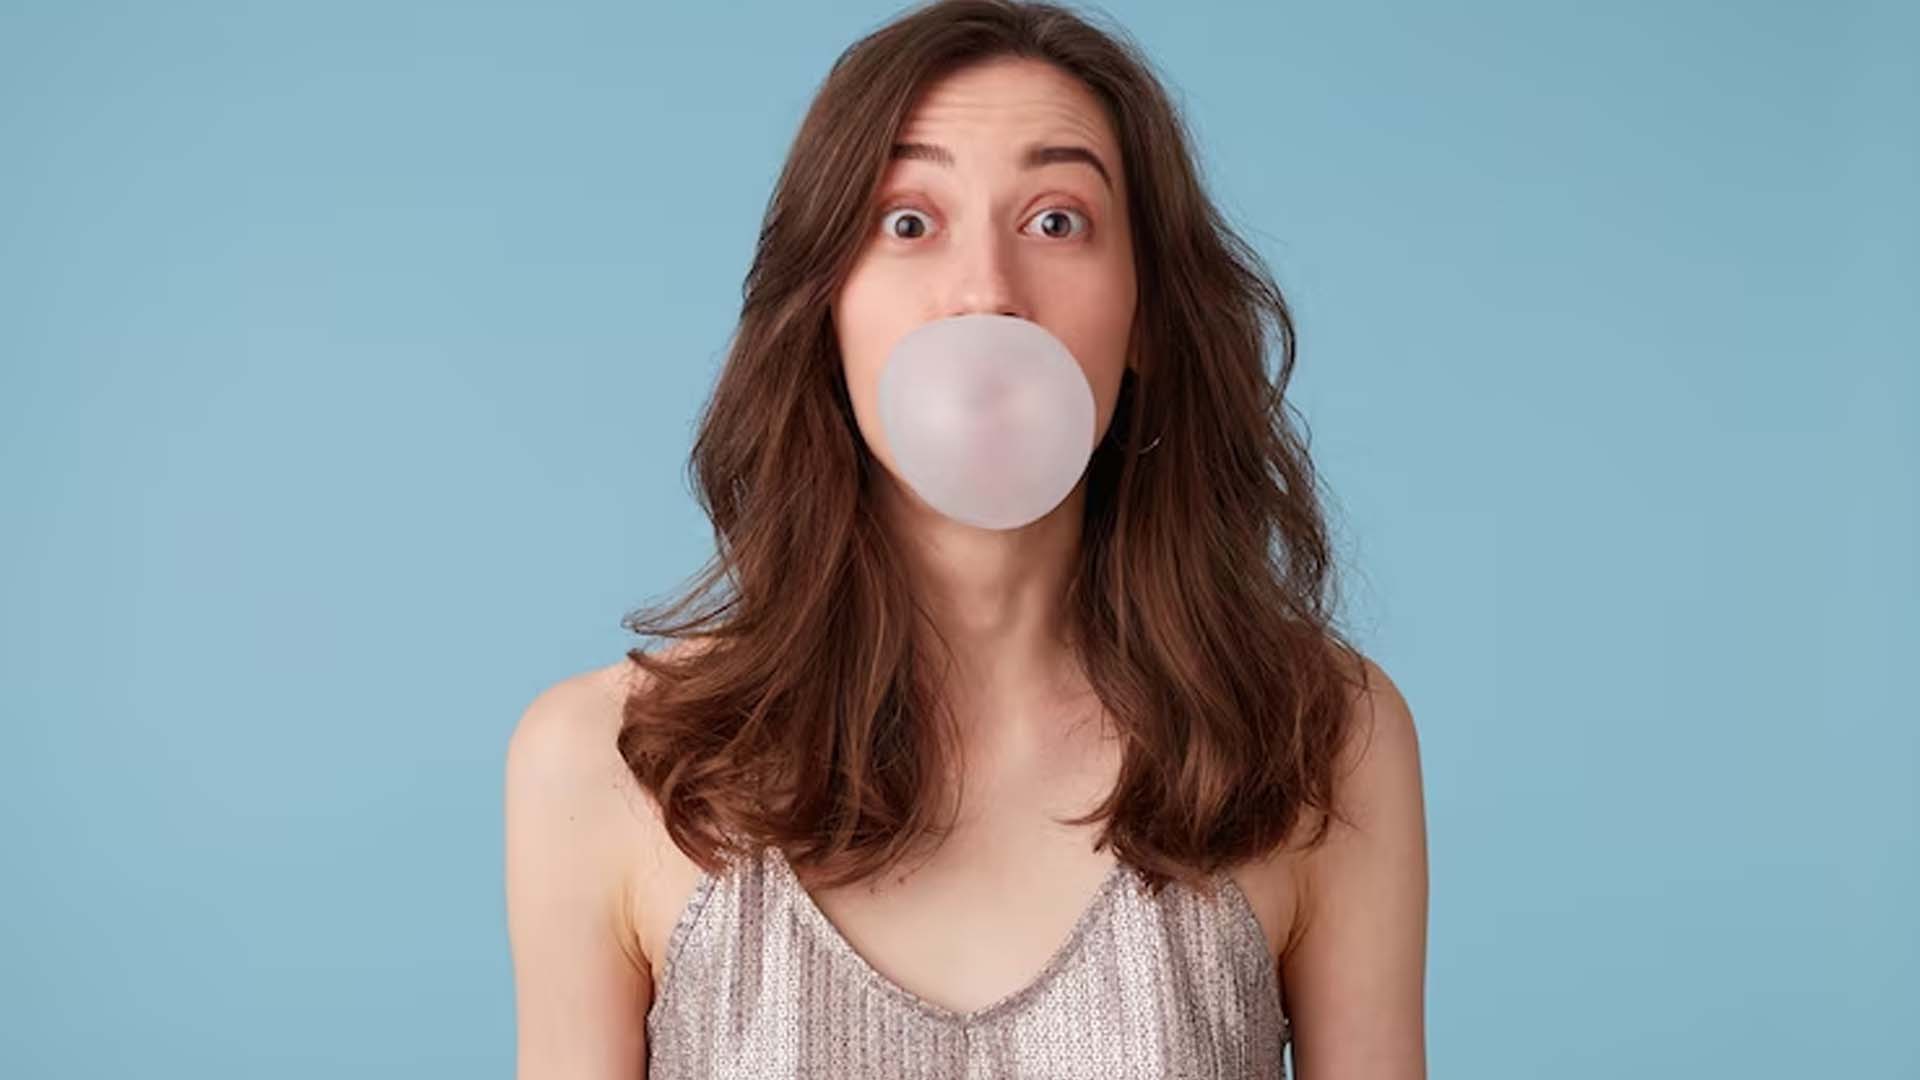 Does Chewing Gum Cause Cancer?